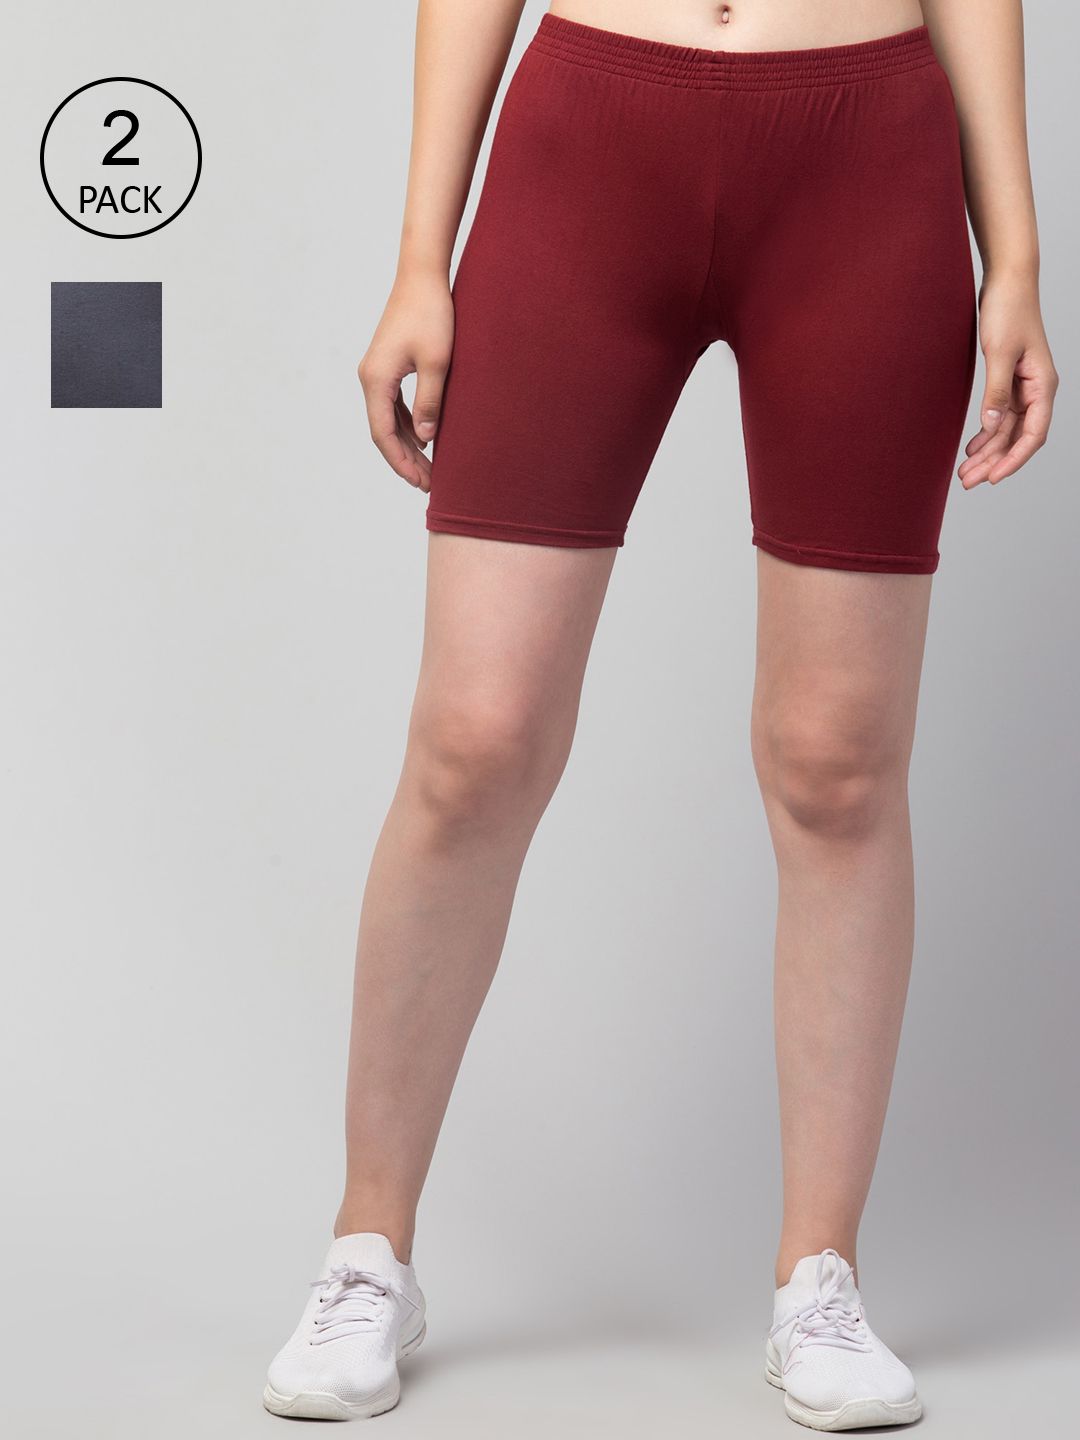 Apraa & Parma Women Set Of 2 Maroon Slim Fit Pure Cotton Cycling Sports Shorts Price in India